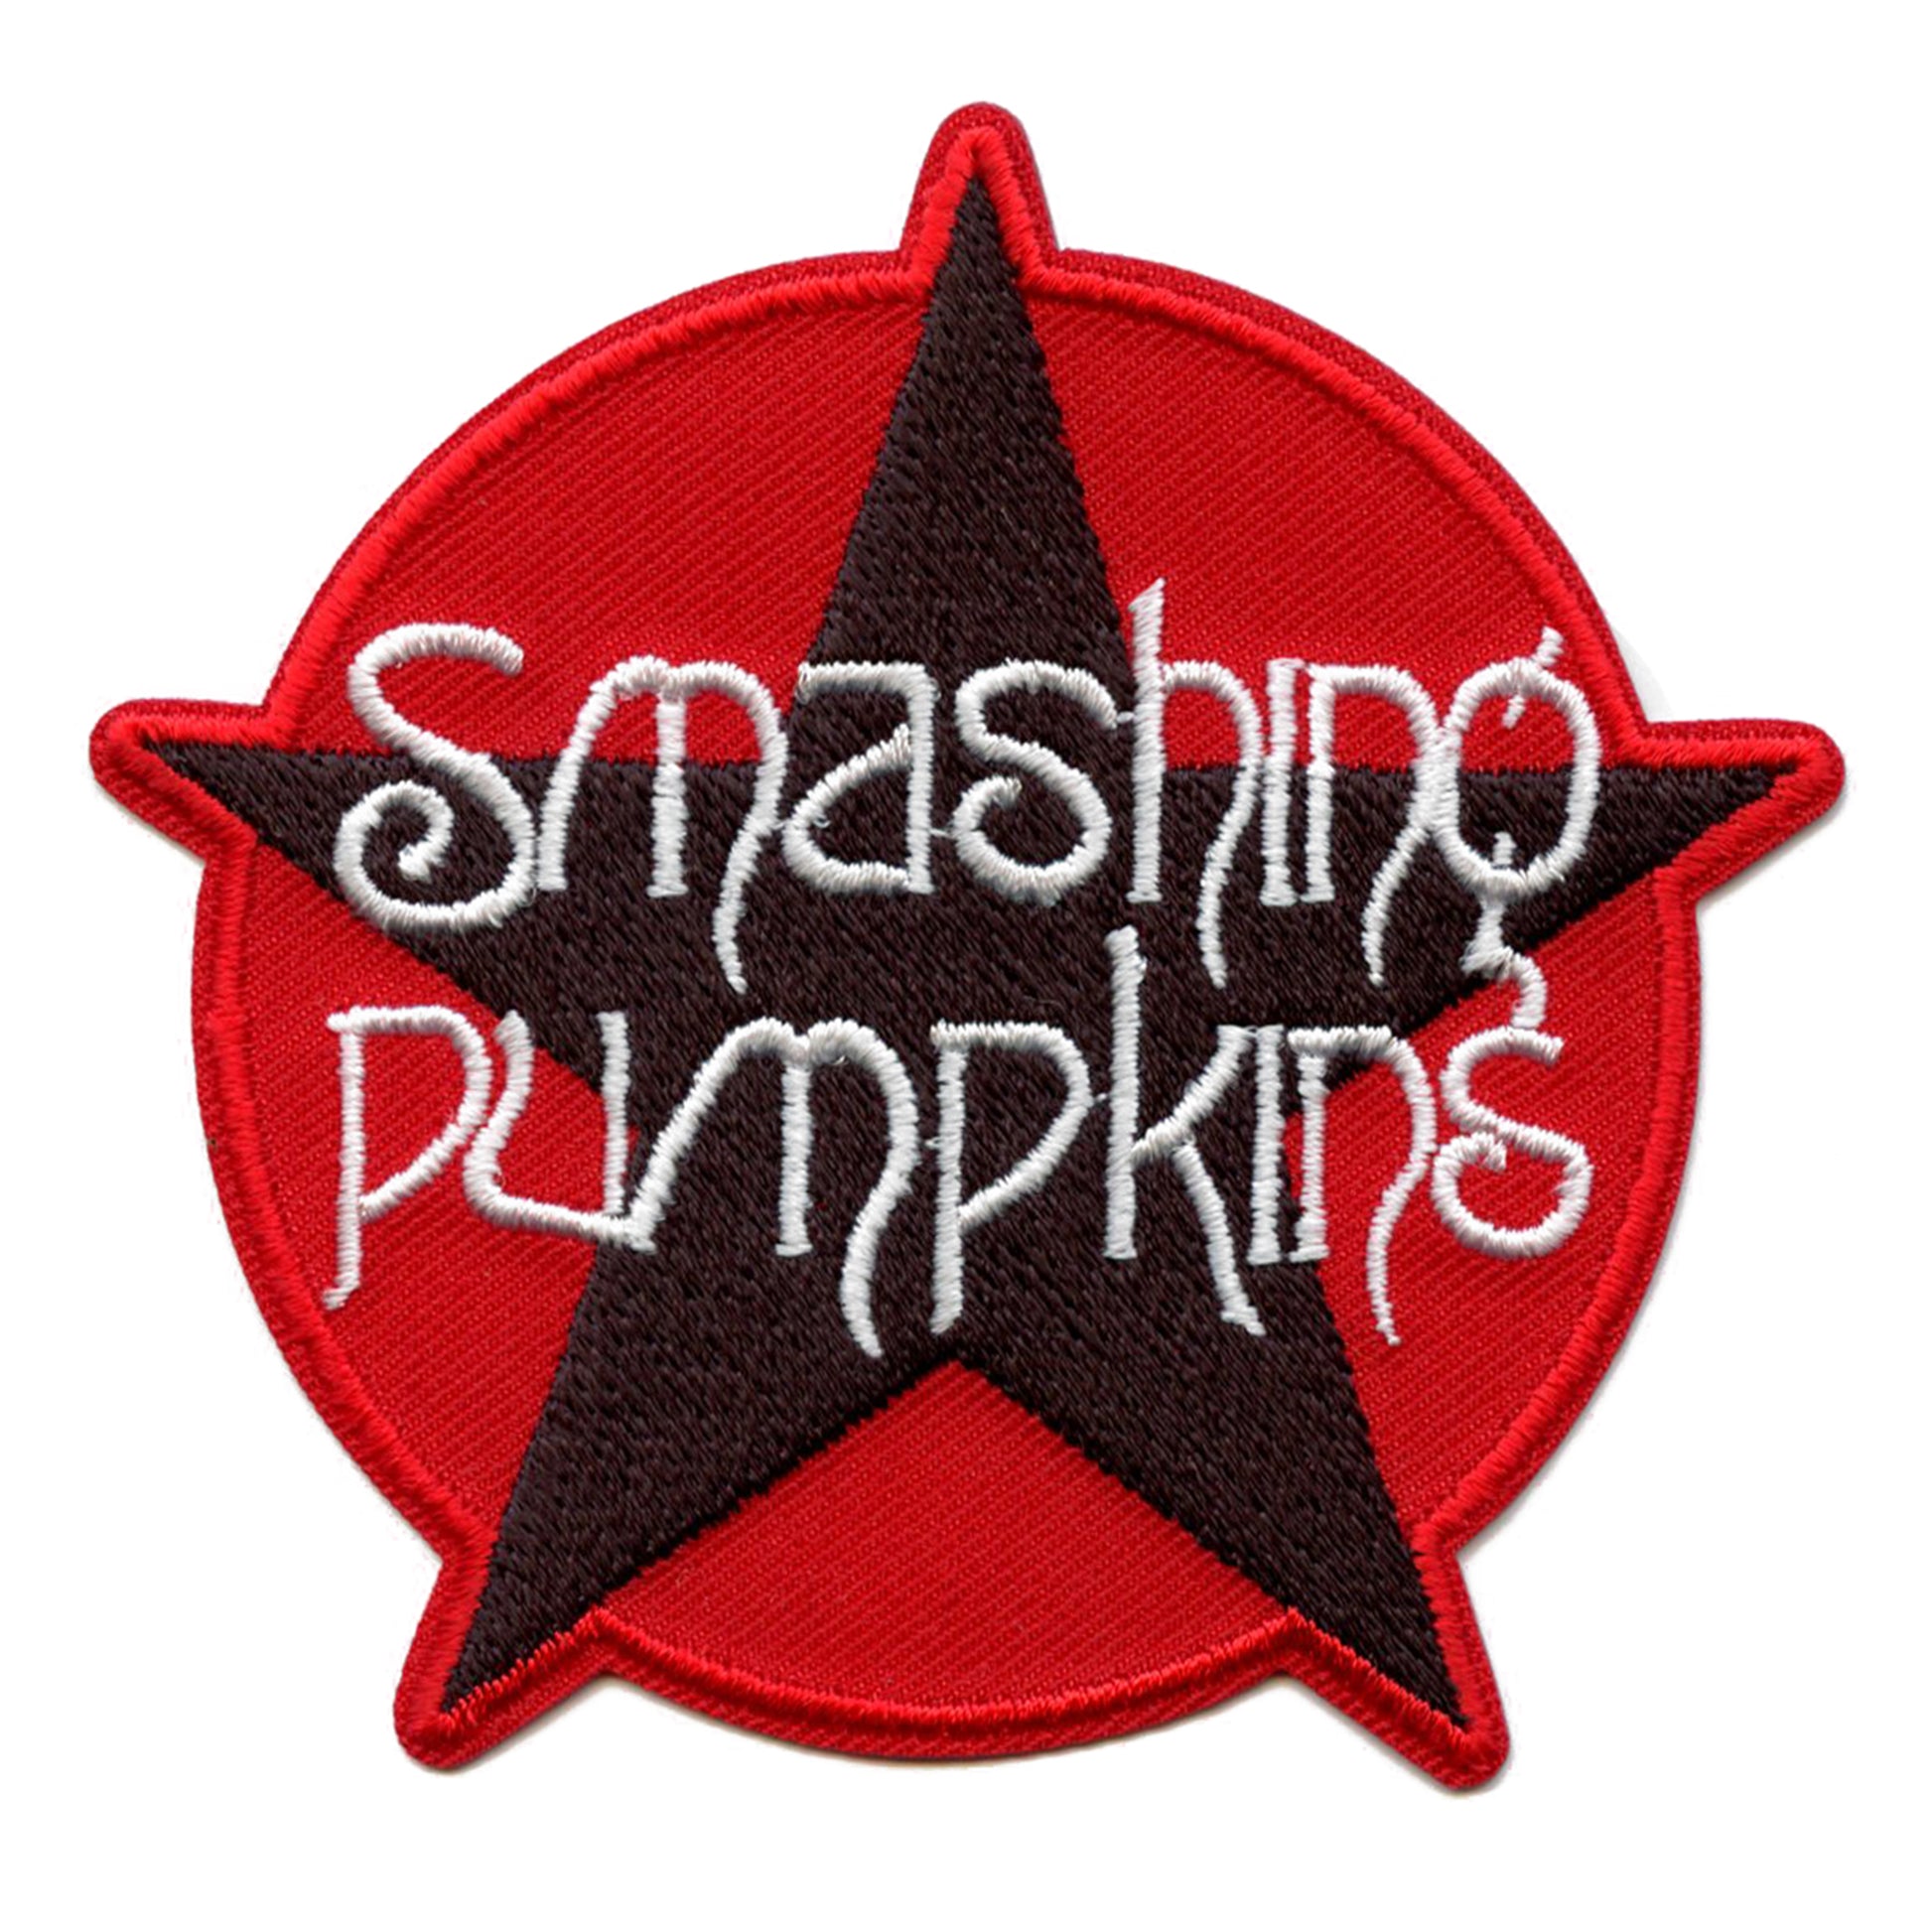 The Smashing Pumpkins Star Logo Patch Chicago Rock Band brodé thermocollant